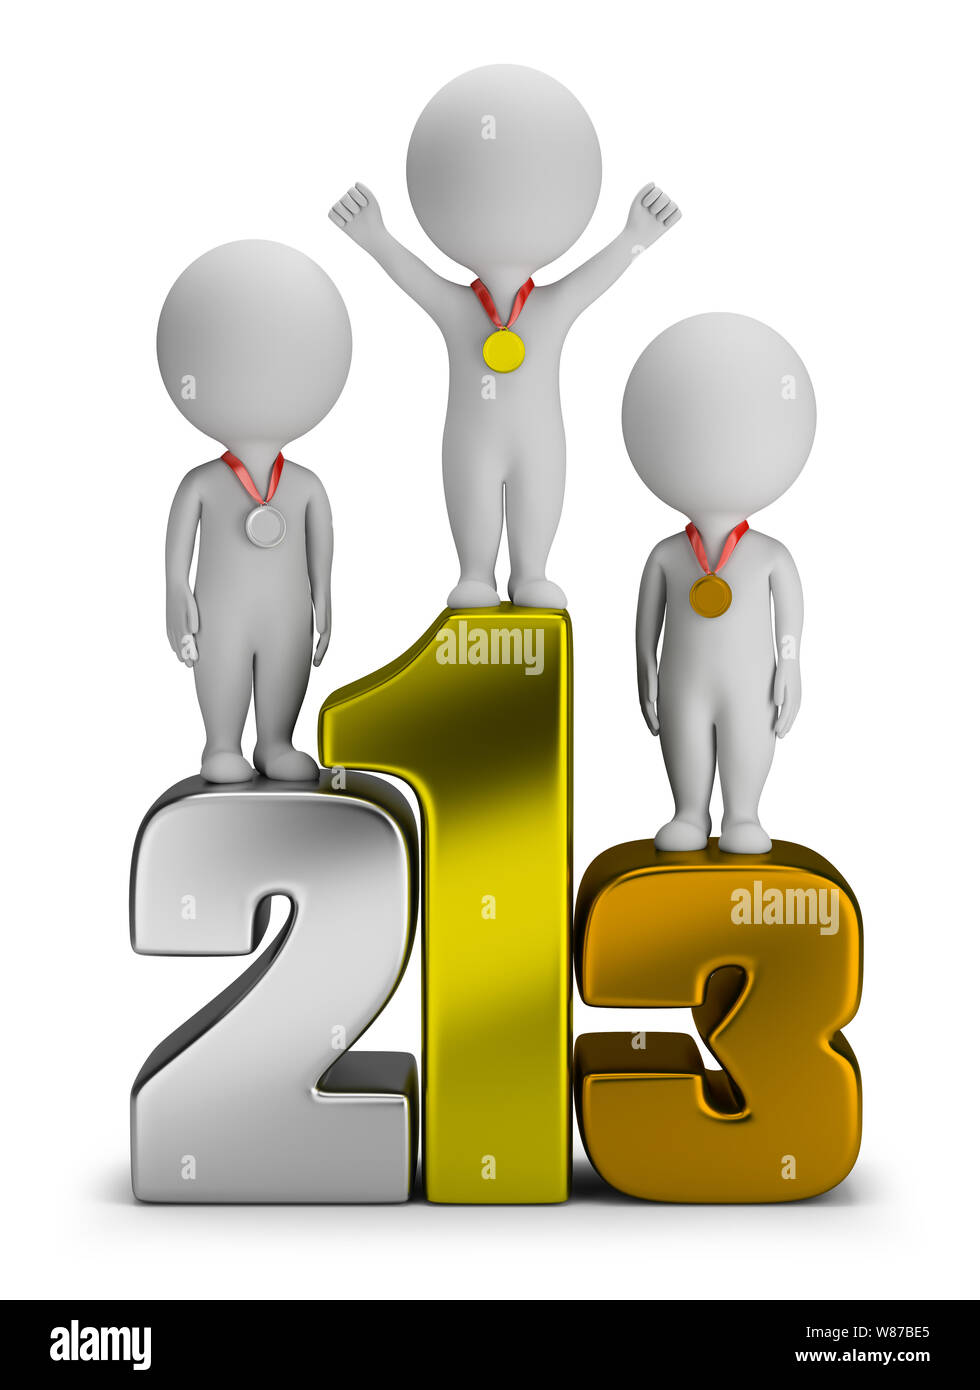 3d small people - winners standing on numbers. 3d image. White background. Stock Photo